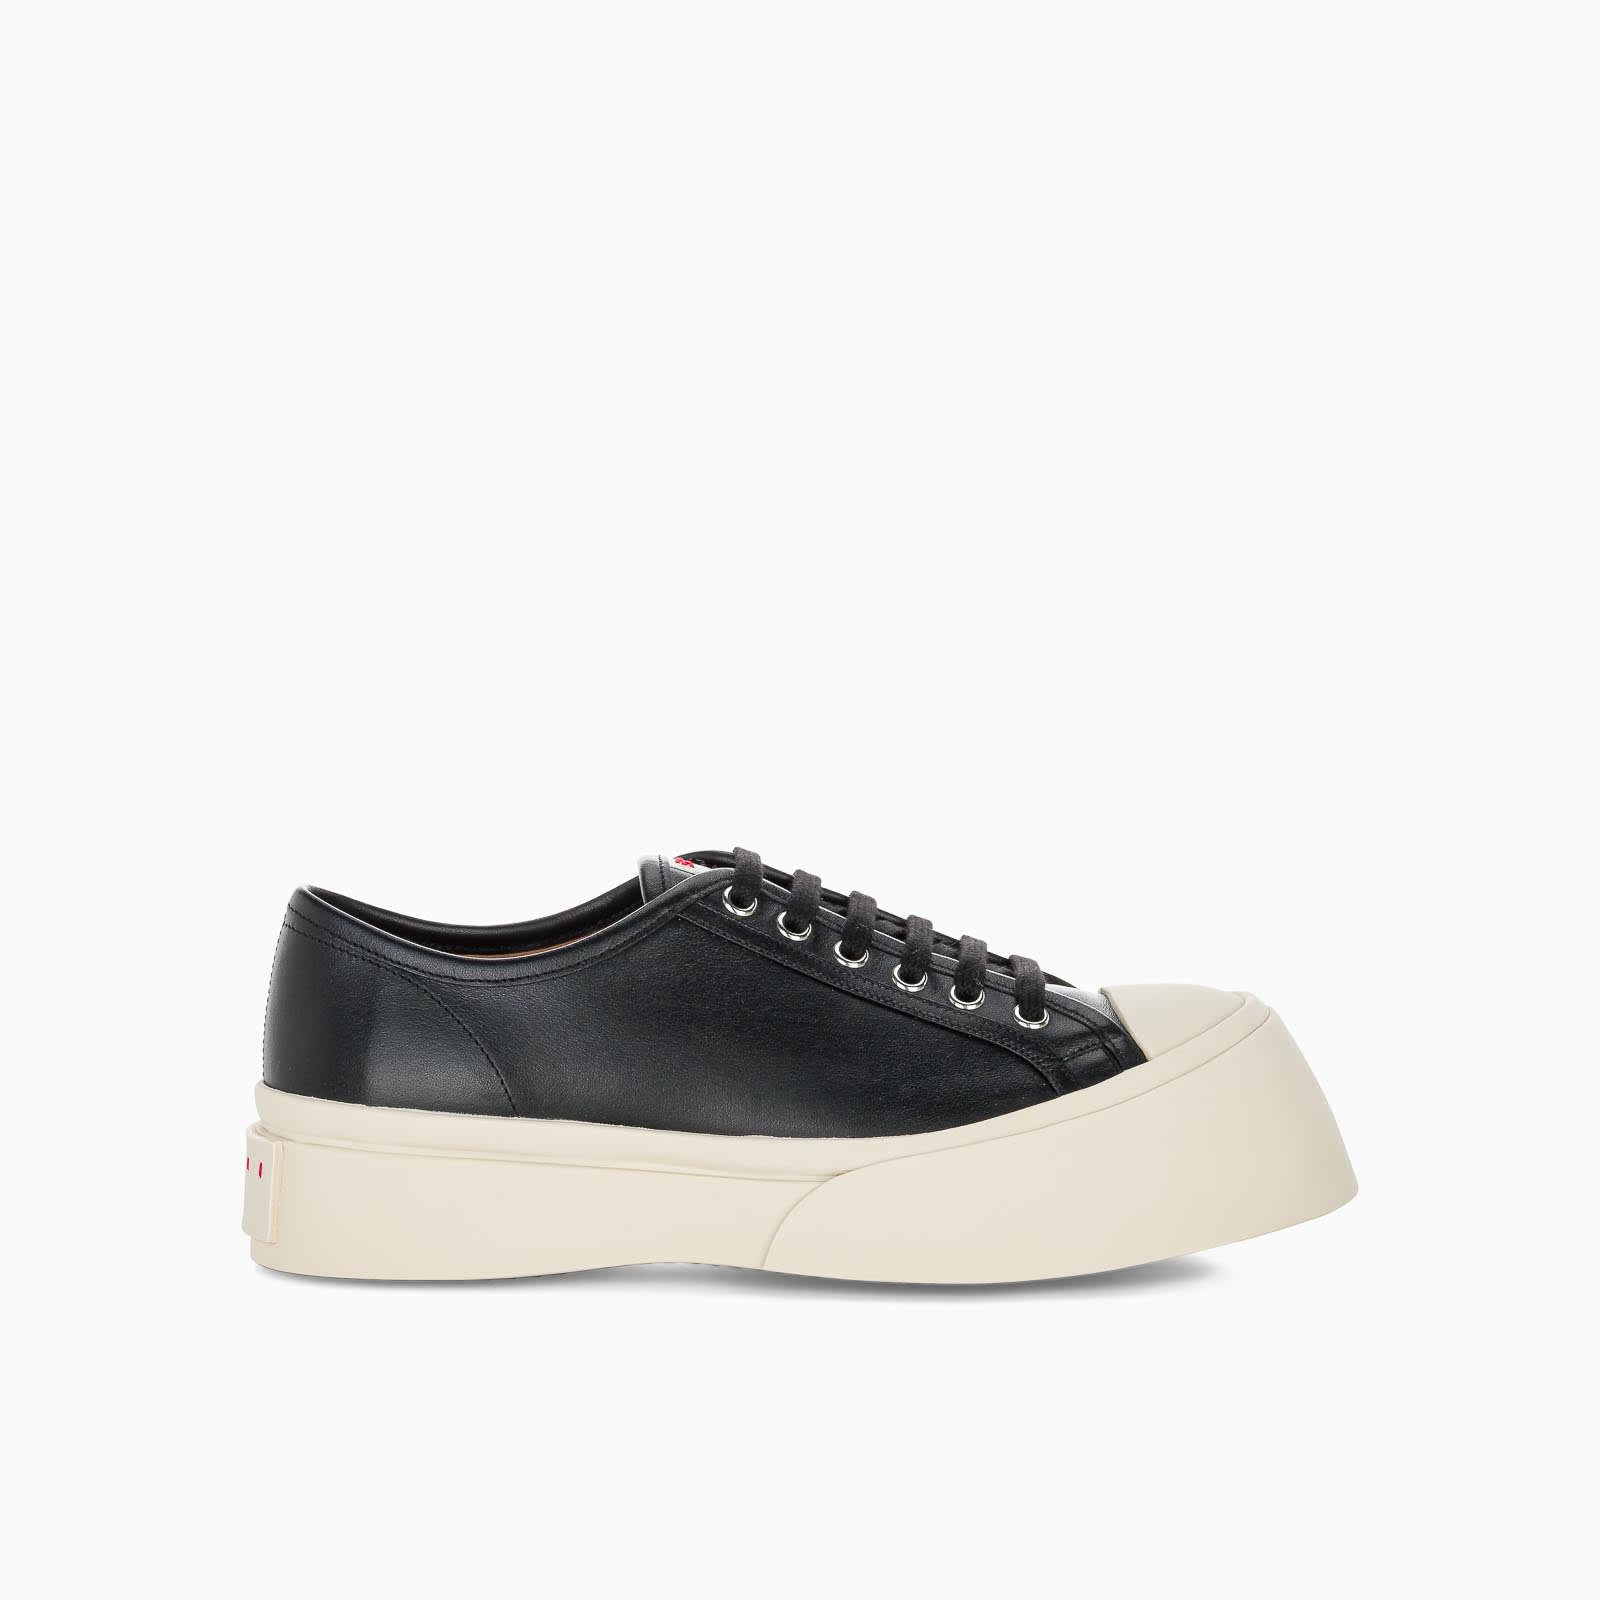 Buy Marni Pablo Sneakers online, shop Marni shoes with free shipping